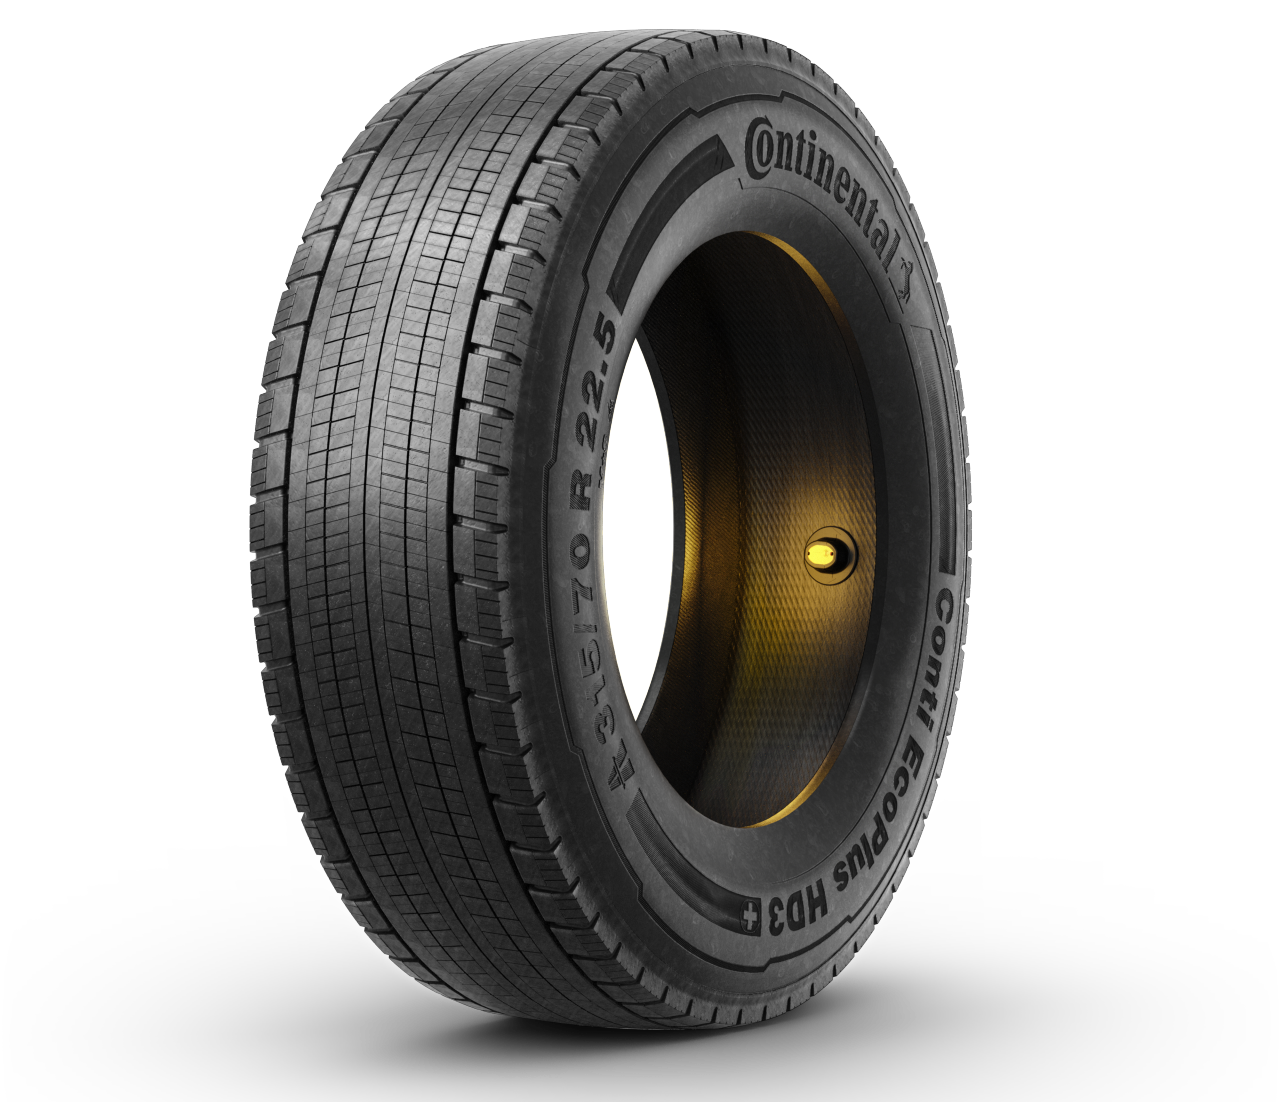 In addition to tire inflation pressure, our advanced sensor technology can also record tire mileage.